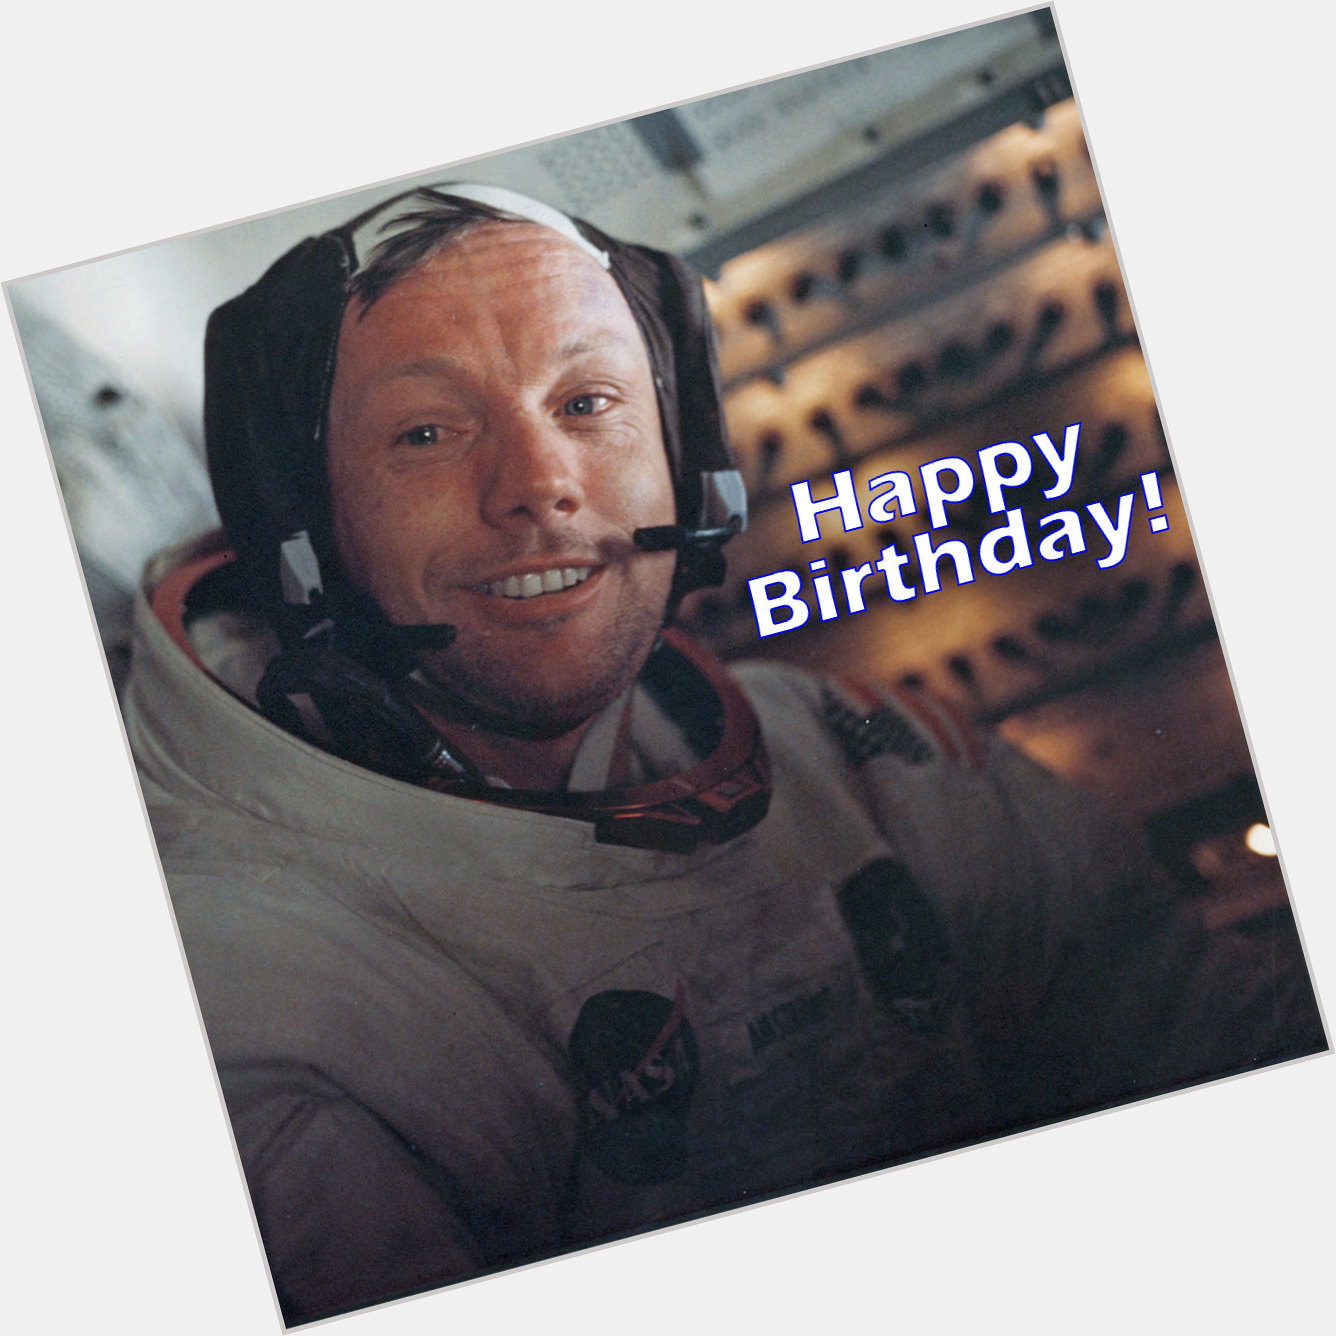 Happy birthday to Neil Armstrong! The first human to walk on the moon would\ve turned 90 today. He died in 2012. 